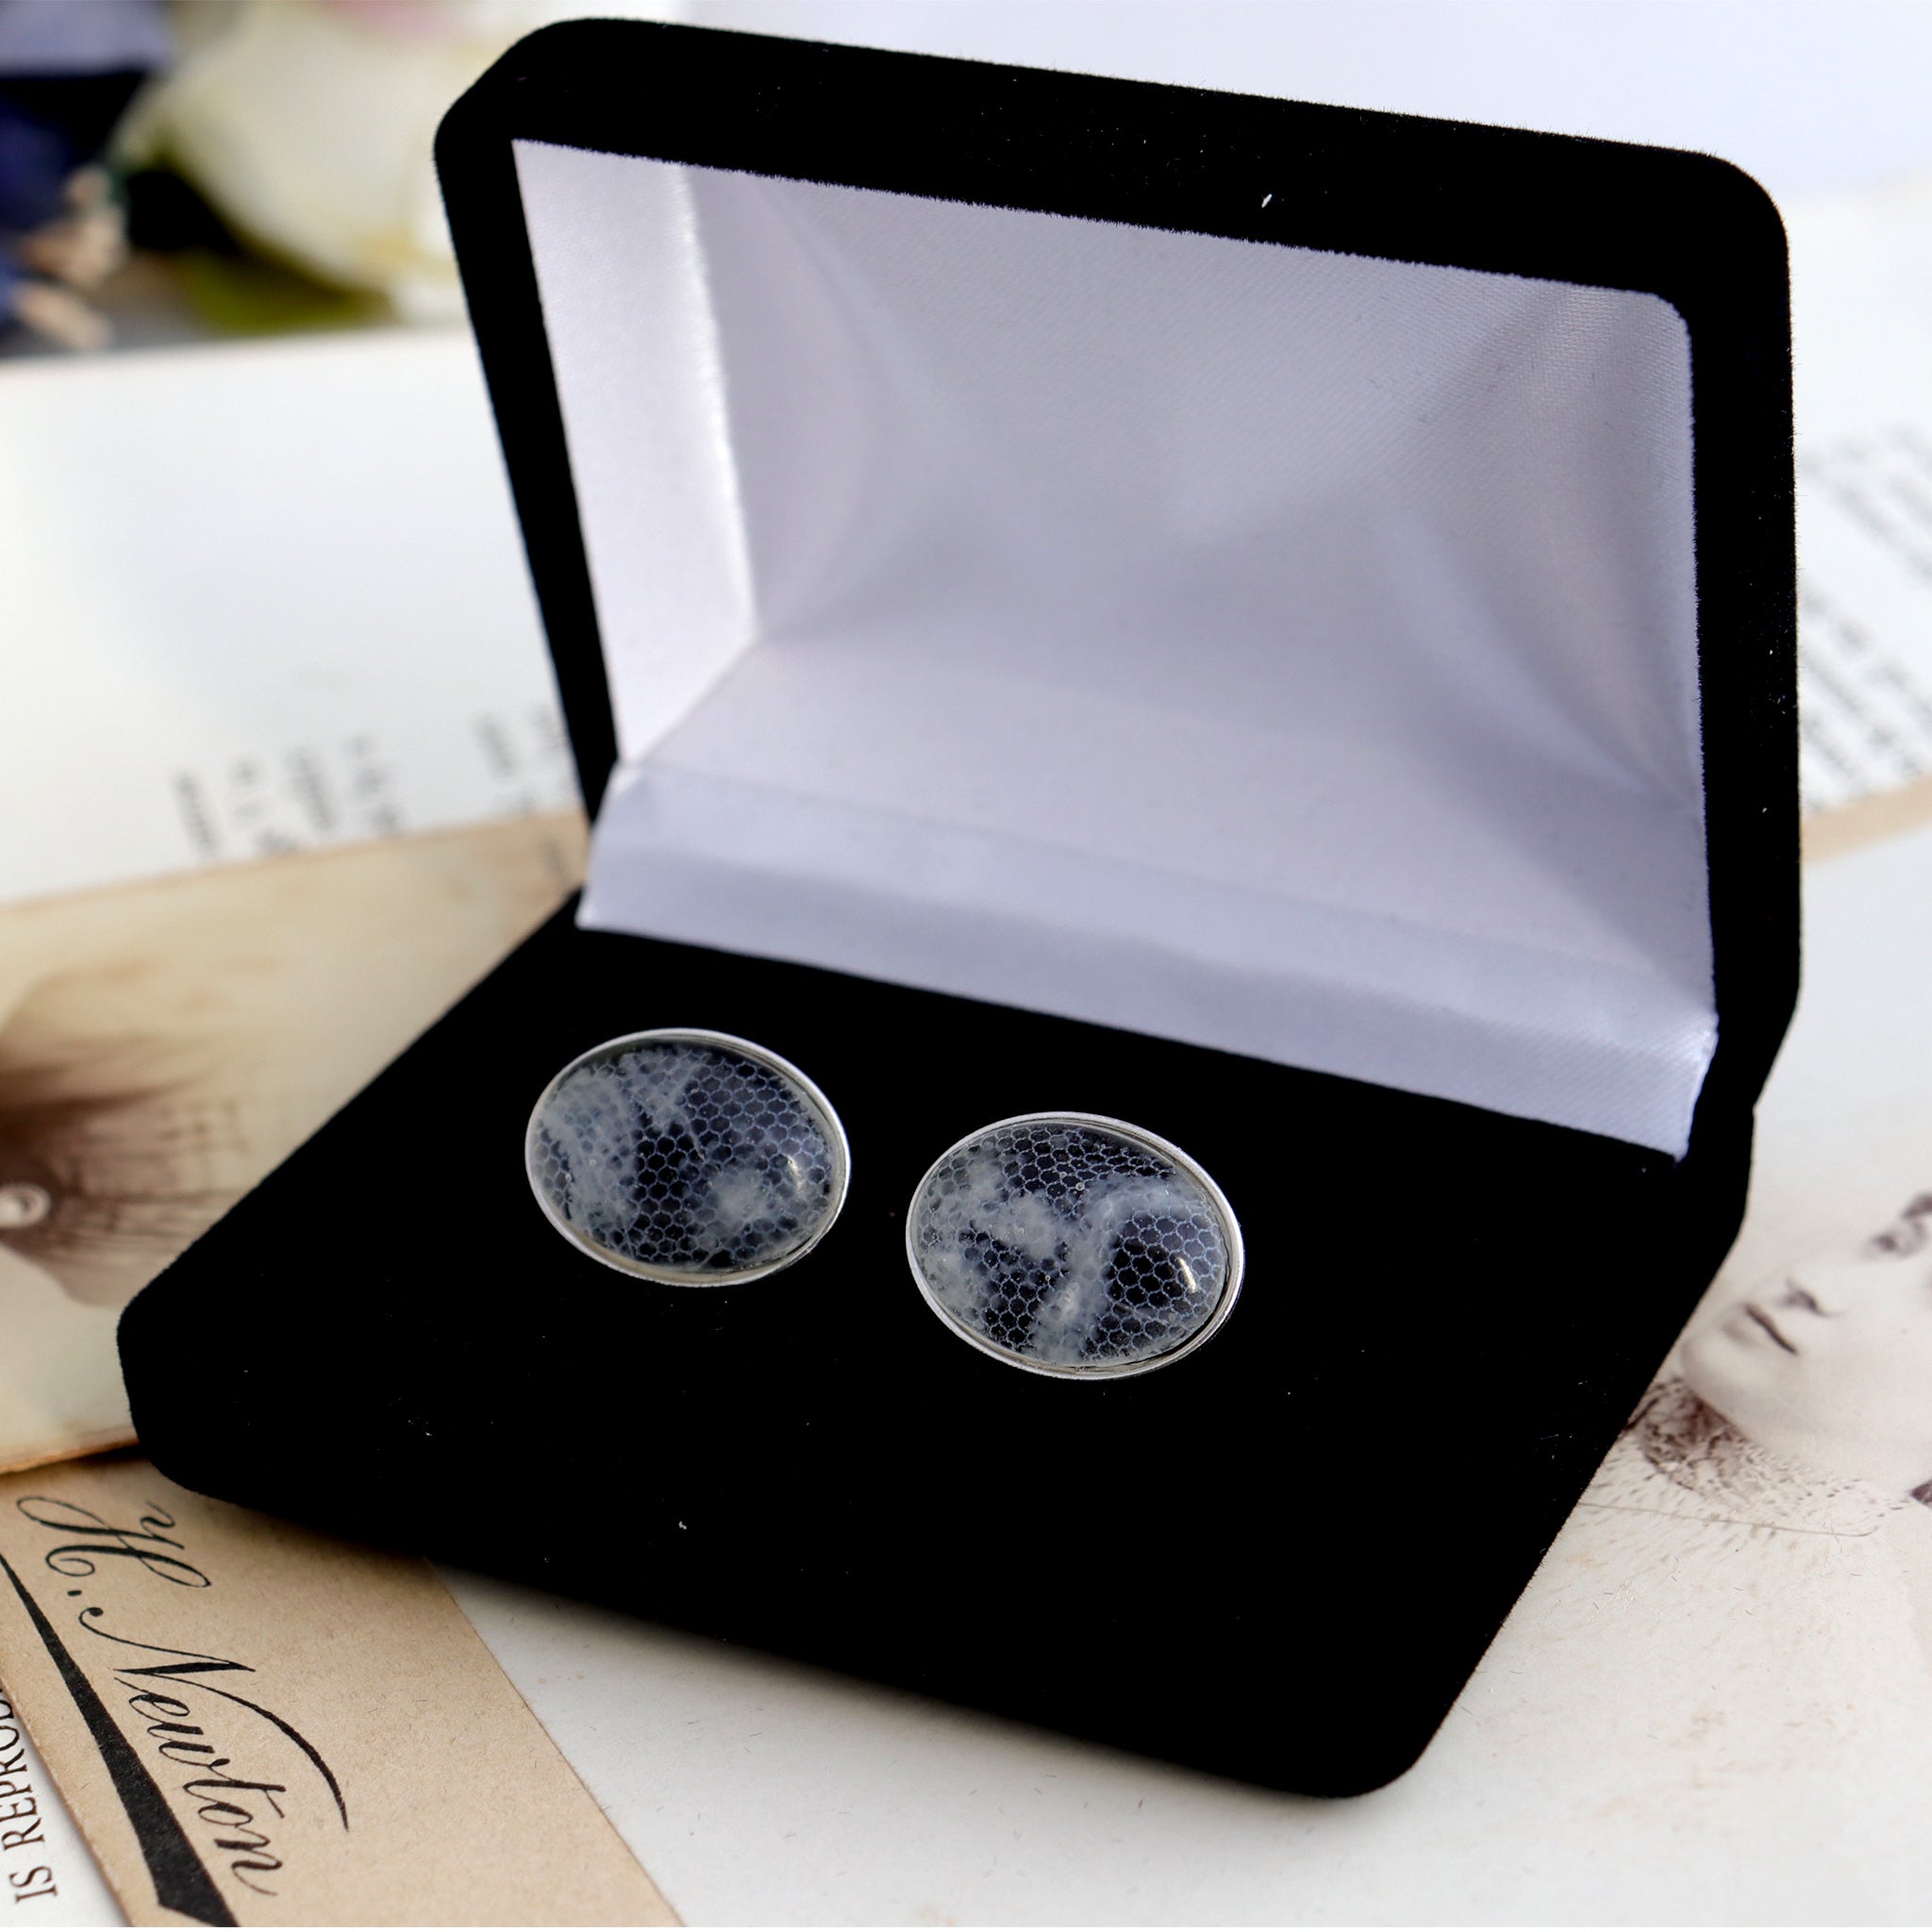 Sterling silver cufflinks with resin beads featuring lace from a bride's wedding dress in a box